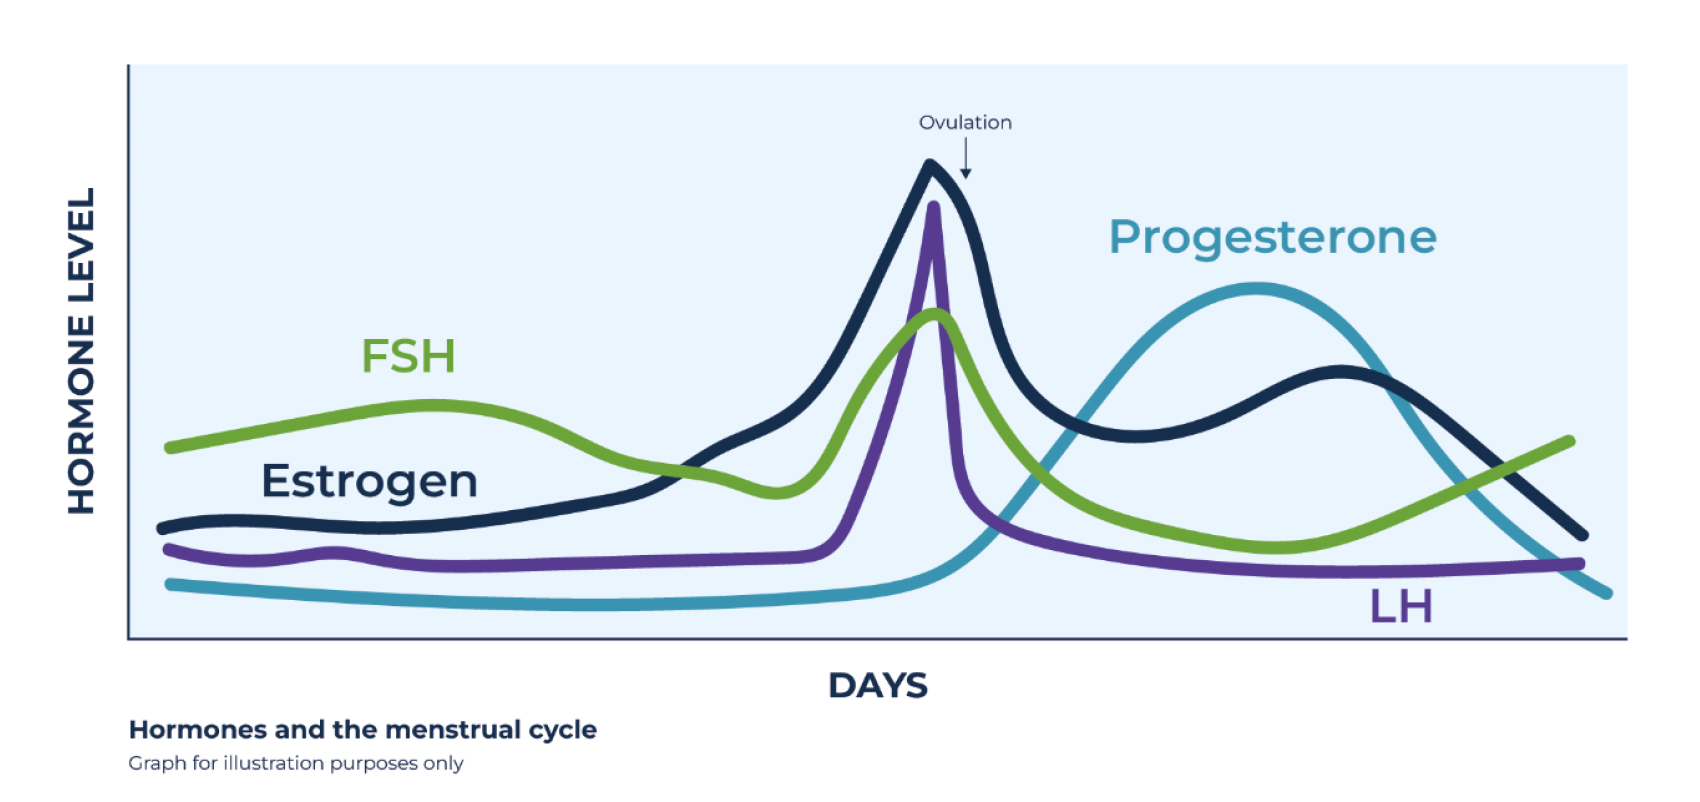 The Science behind the Clearblue® Menopause Stage Indicator